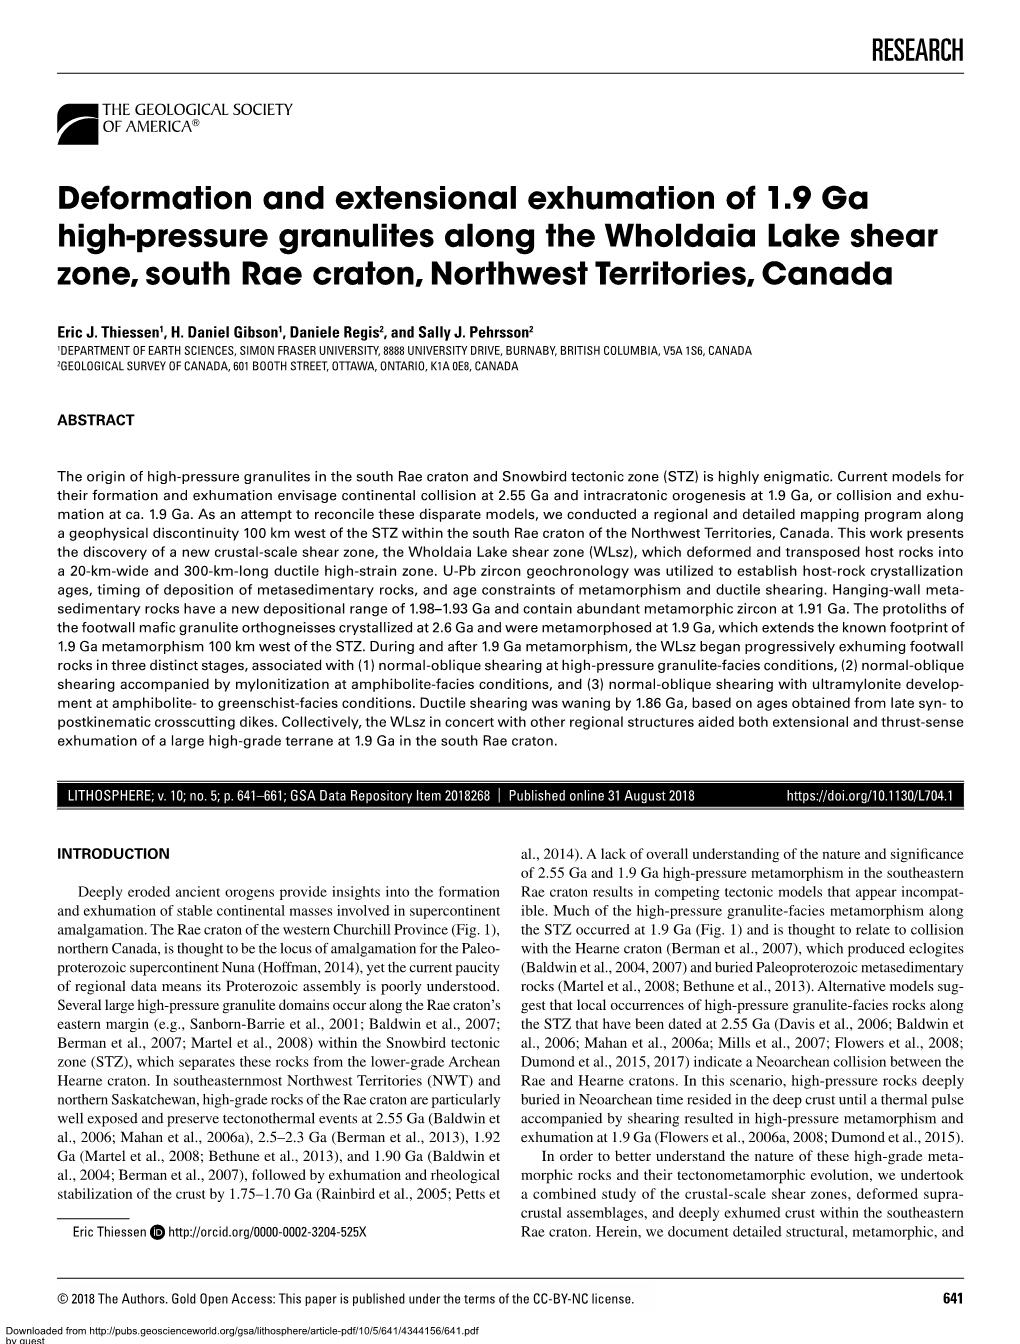 RESEARCH Deformation and Extensional Exhumation of 1.9 Ga High‑Pressure Granulites Along the Wholdaia Lake Shear Zone, South R